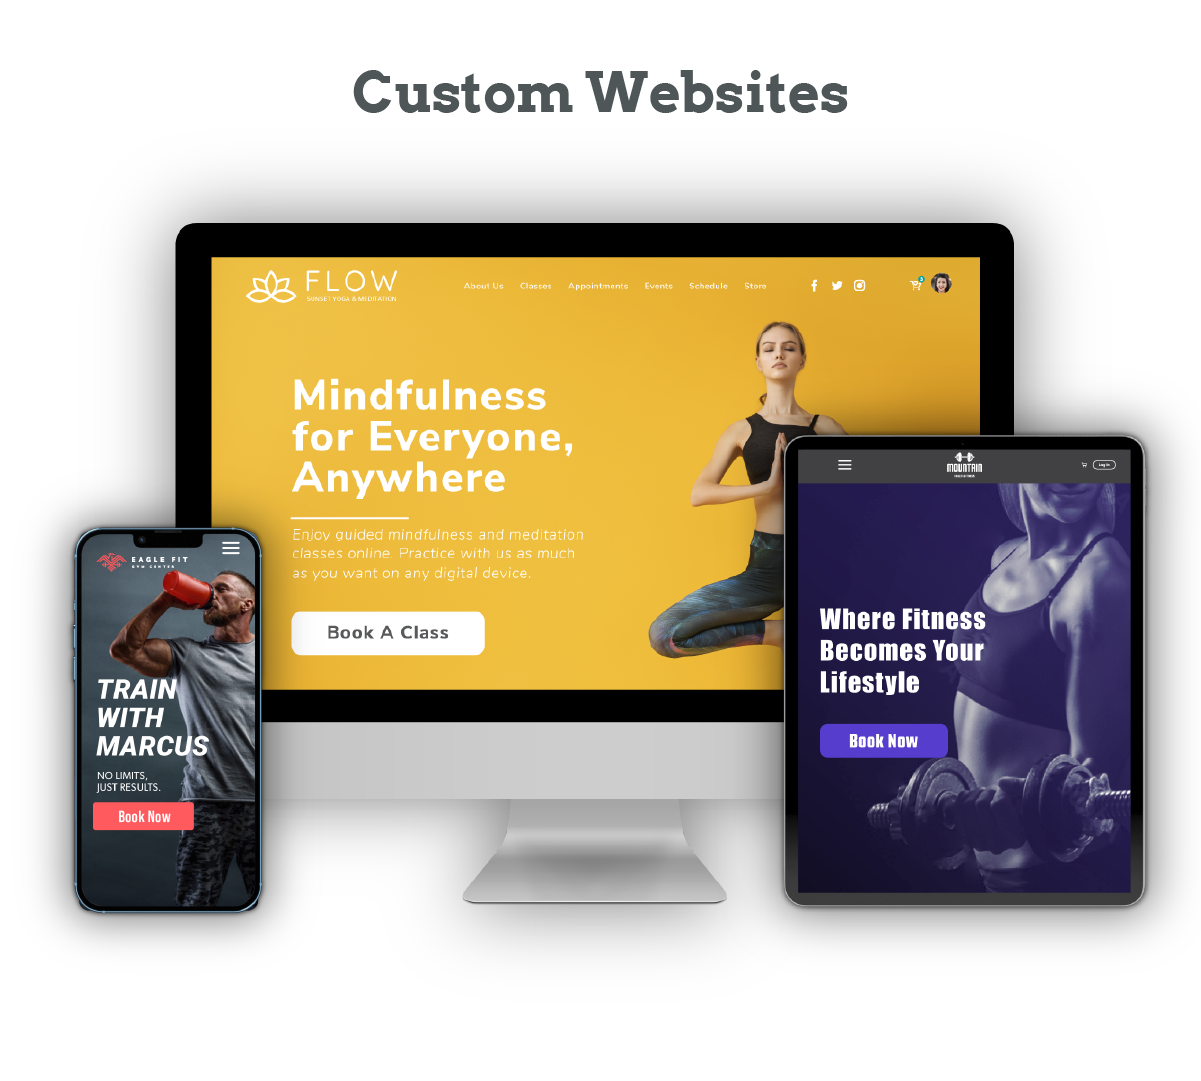 Showcase your business with an easy-to-use custom website.